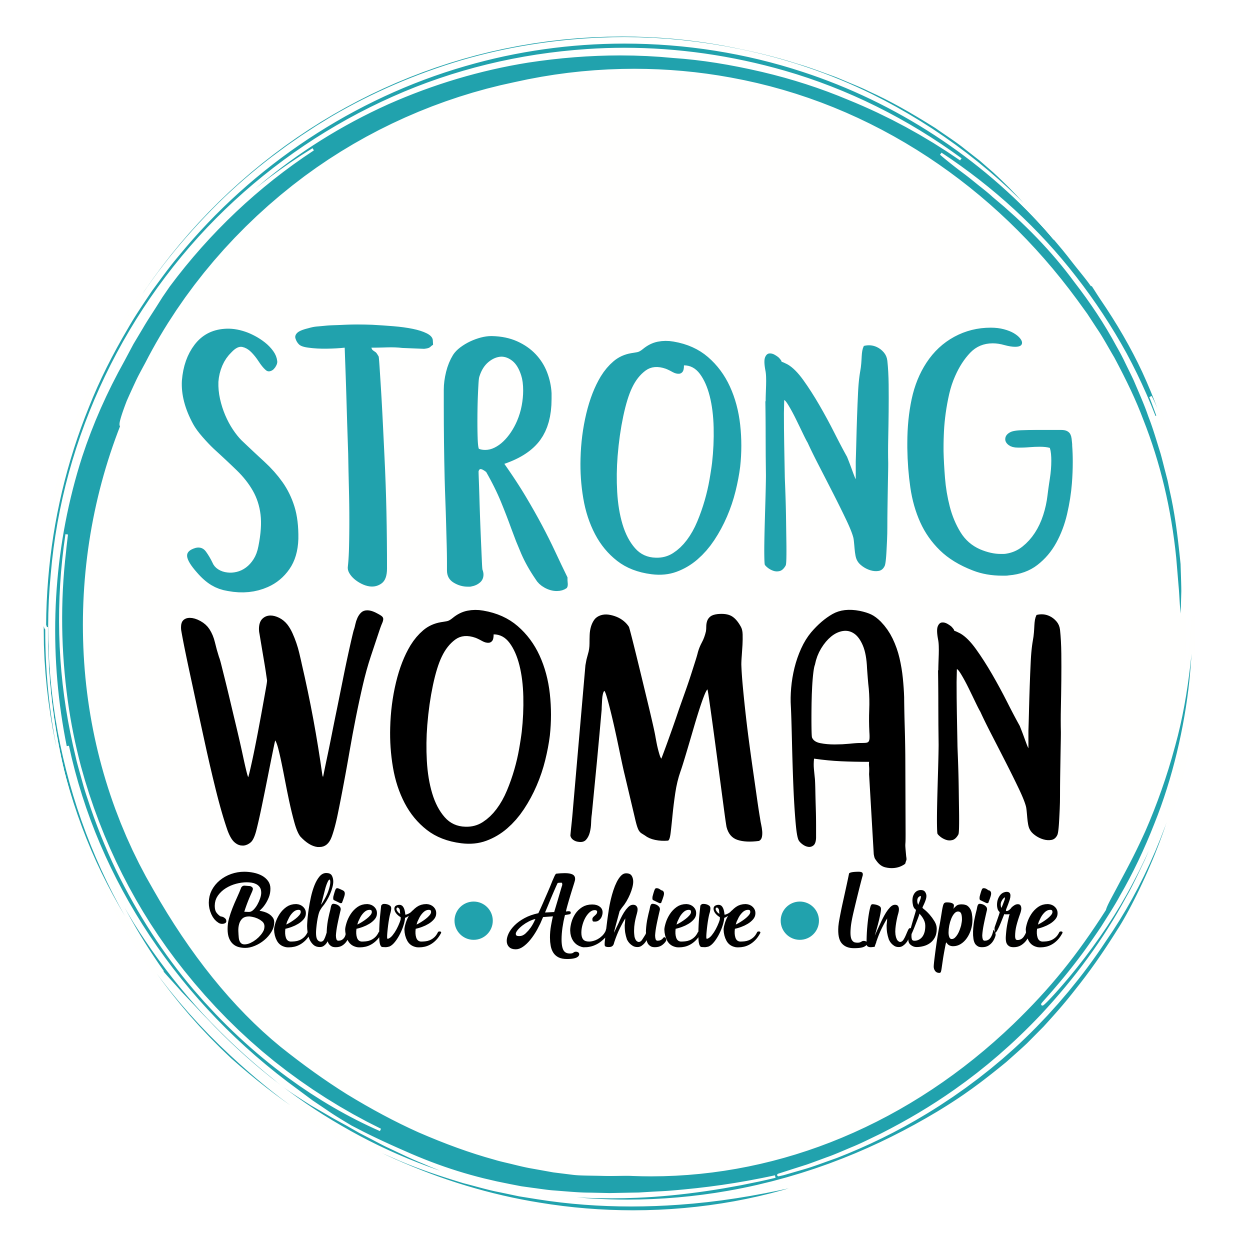 Strong Woman - Online Health & Fitness, Nutrition & Health Coaching. Believe · Achieve · Inspire